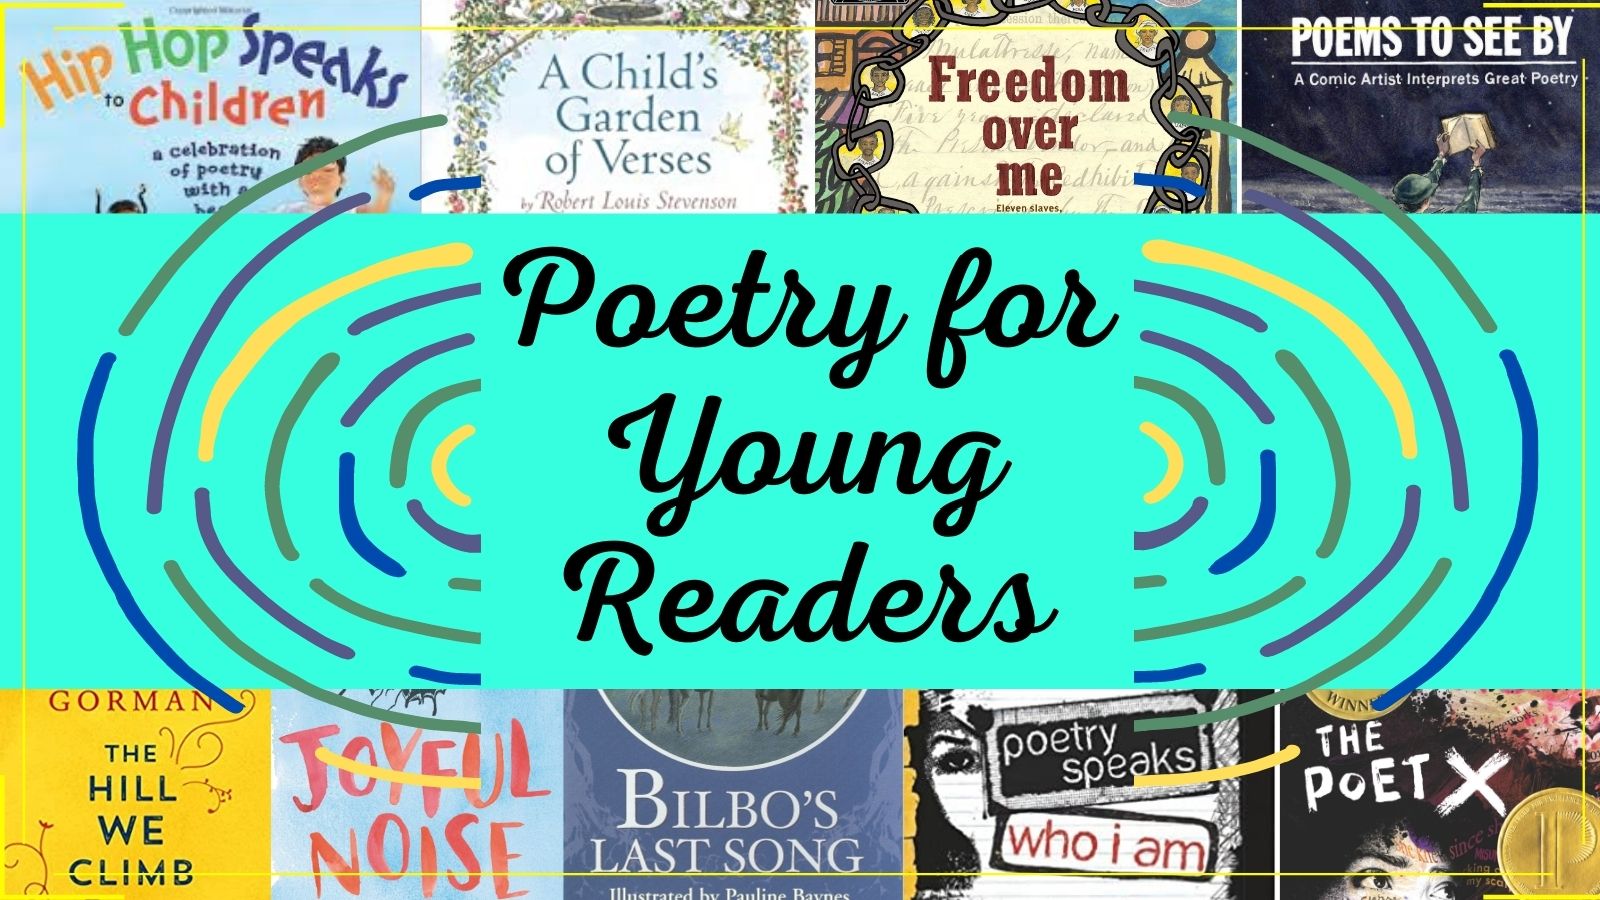 intro to poetry for young readers